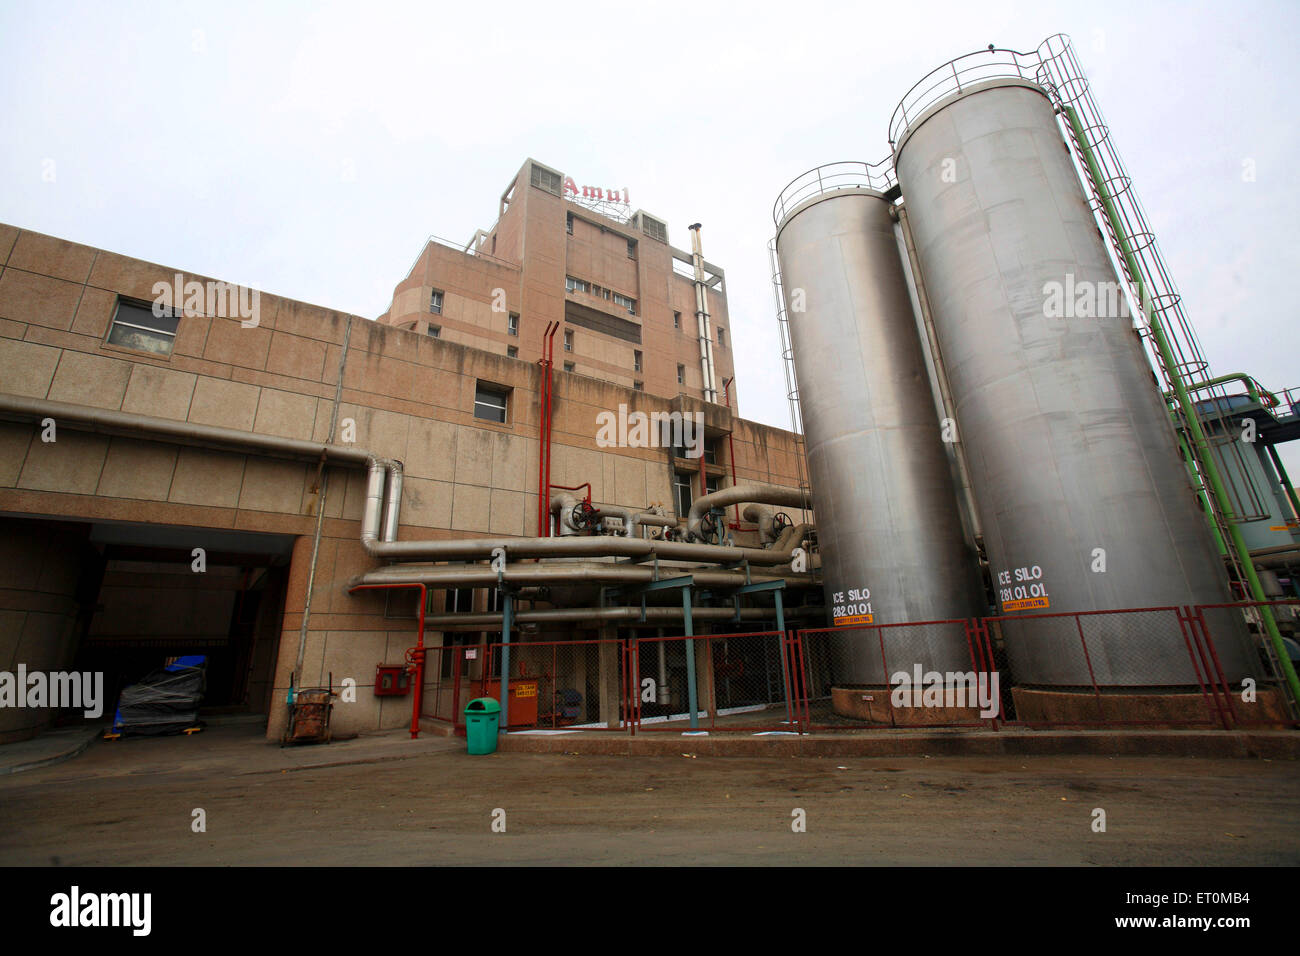 Große Tanks, Amul Factory, Anand, Gujarat, Indien Stockfoto